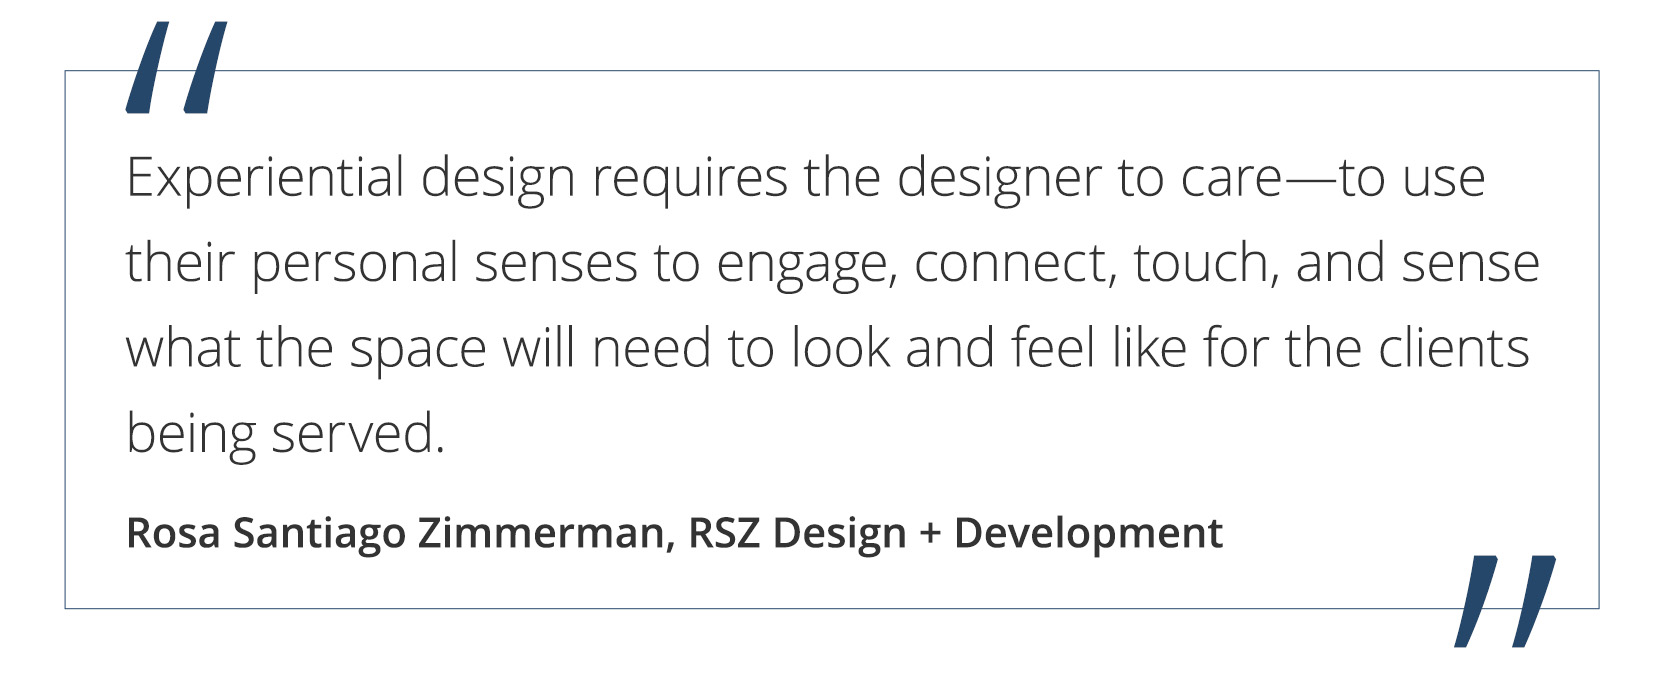 Graphic featuring the quote “Experiential design requires the designer to care—to use their personal senses to engage, connect, touch, and sense what the space will need to look and feel like for the clients being served.” by Rosa Santiago Zimmerman of RSZ Design + Development.